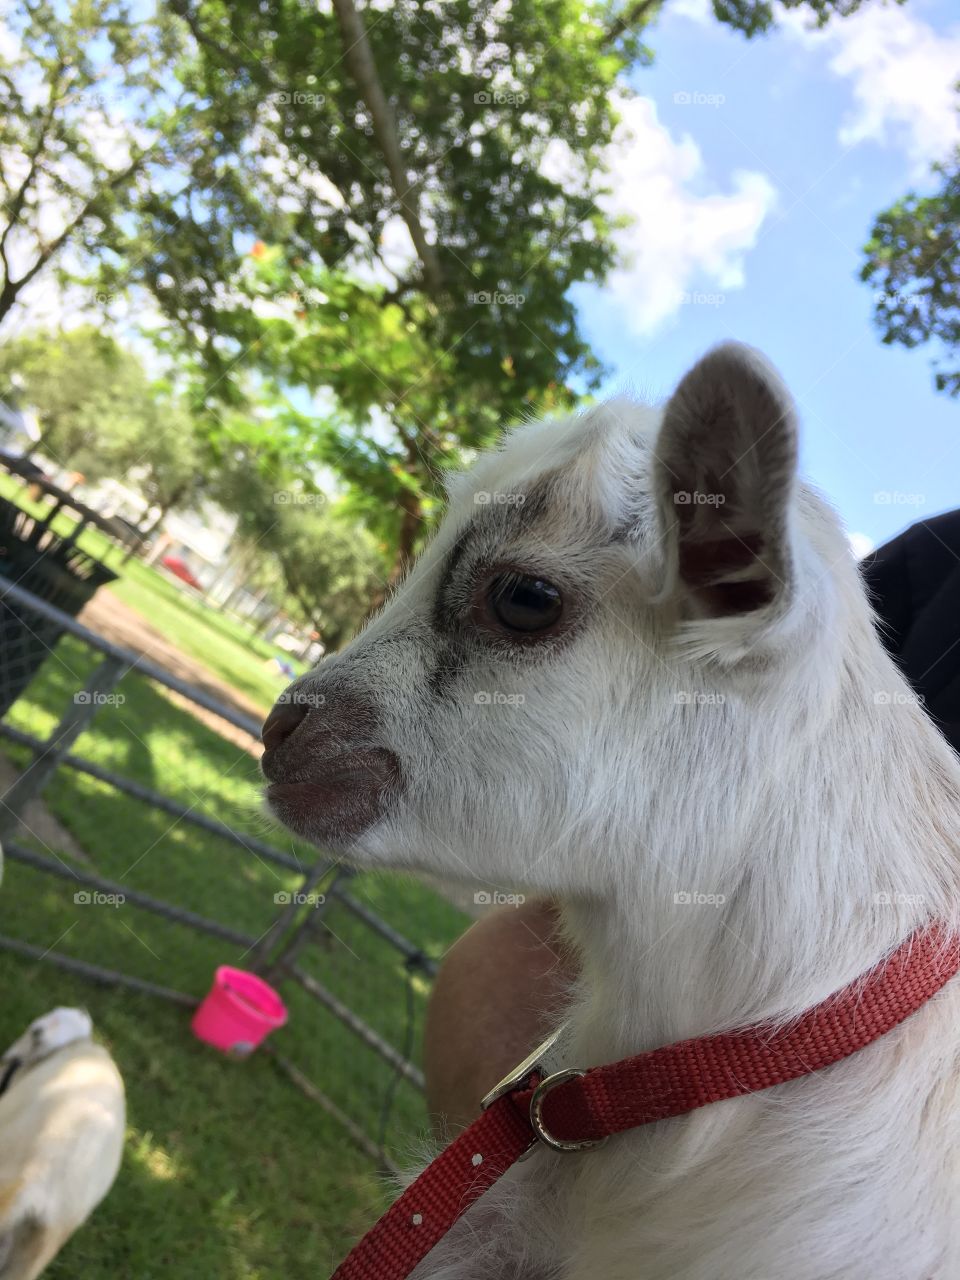 A white baby goat at a petting zoo